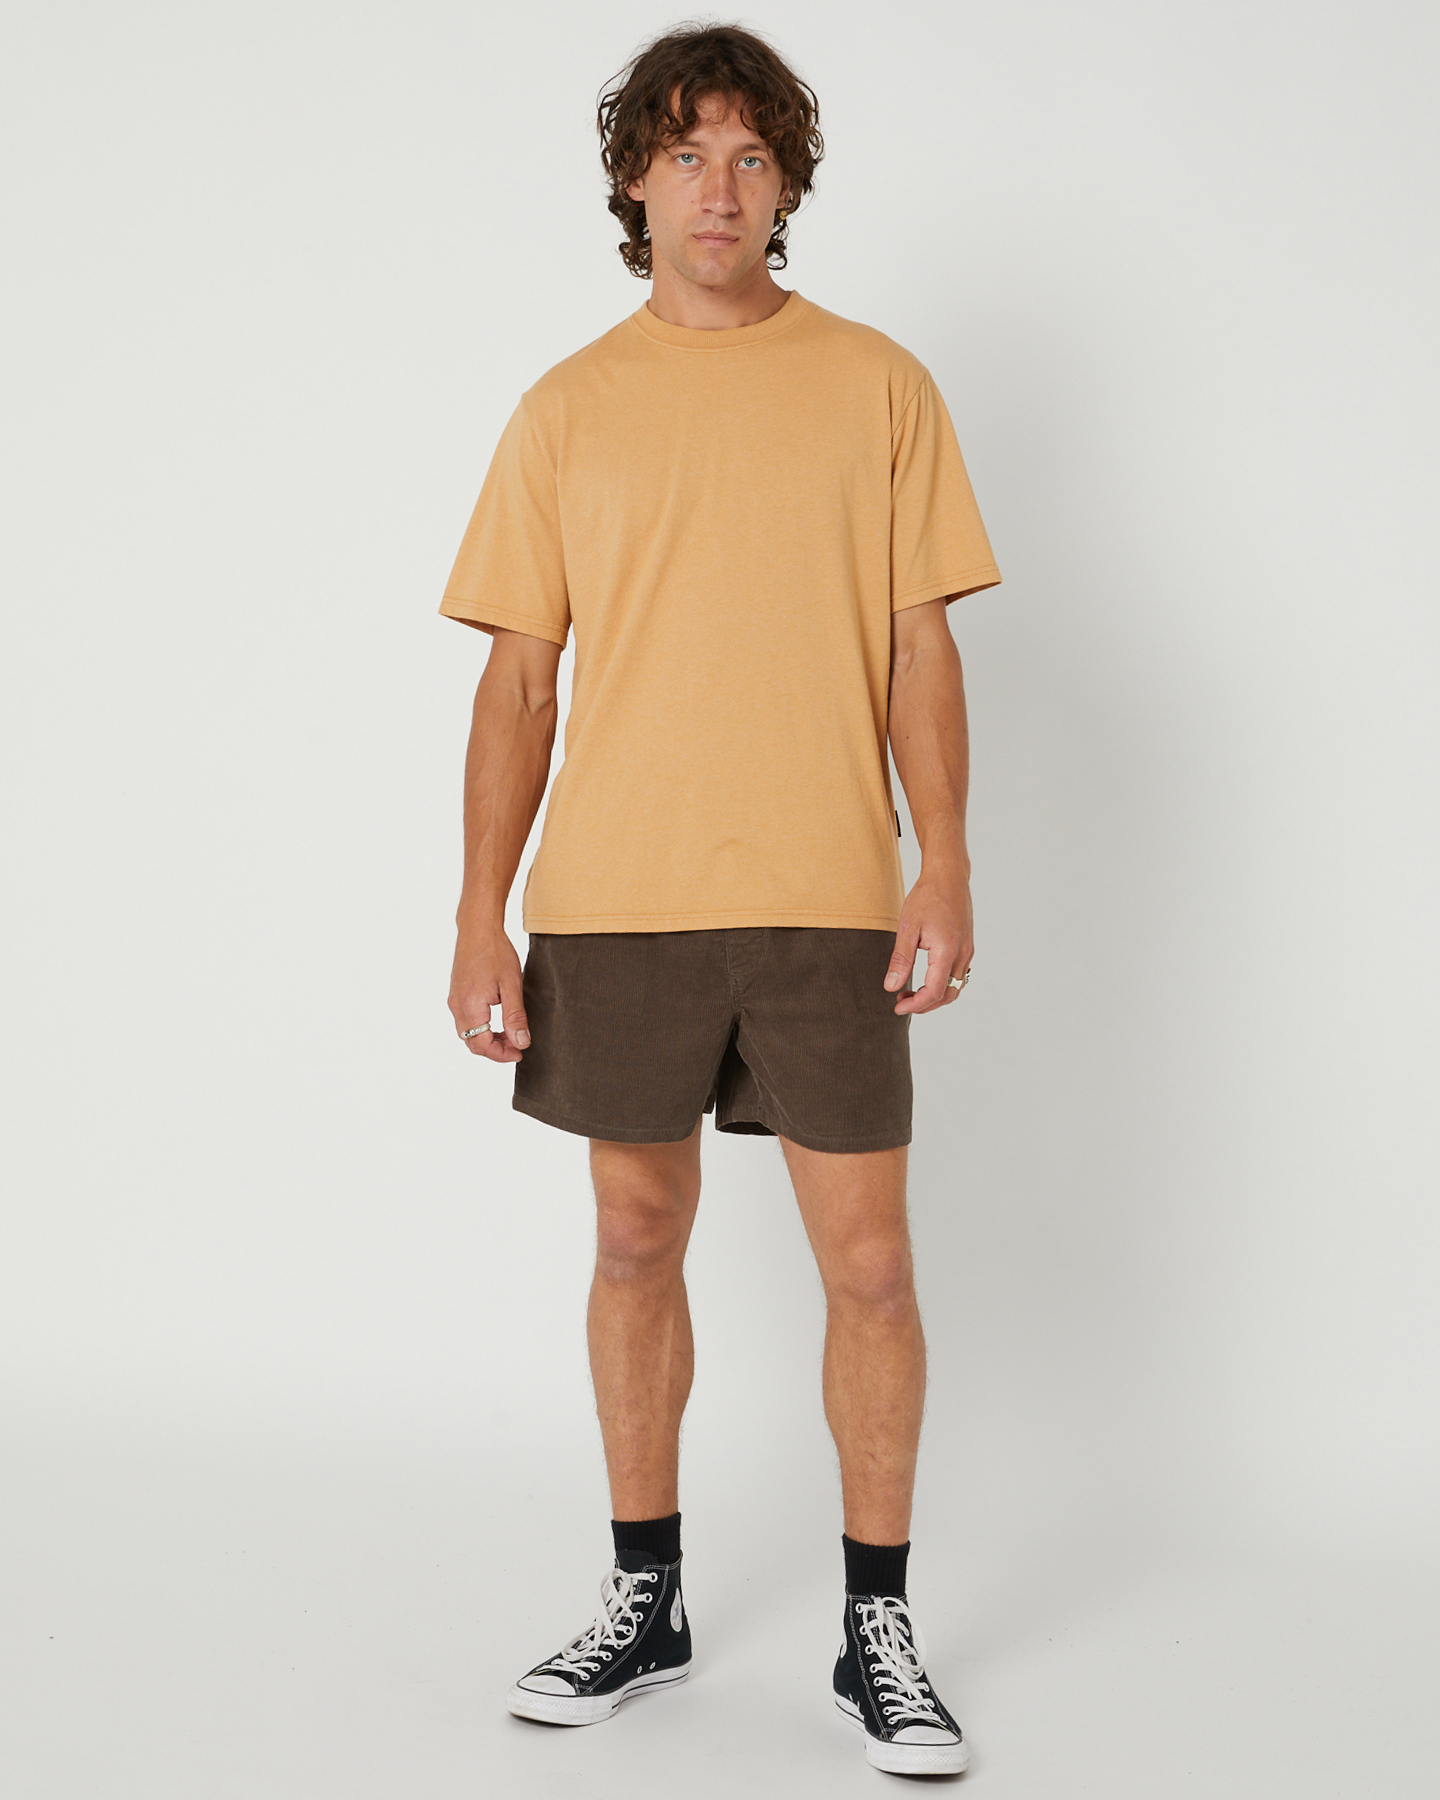 Wrangler Roomie Mens Short - Pacific Oyster | SurfStitch